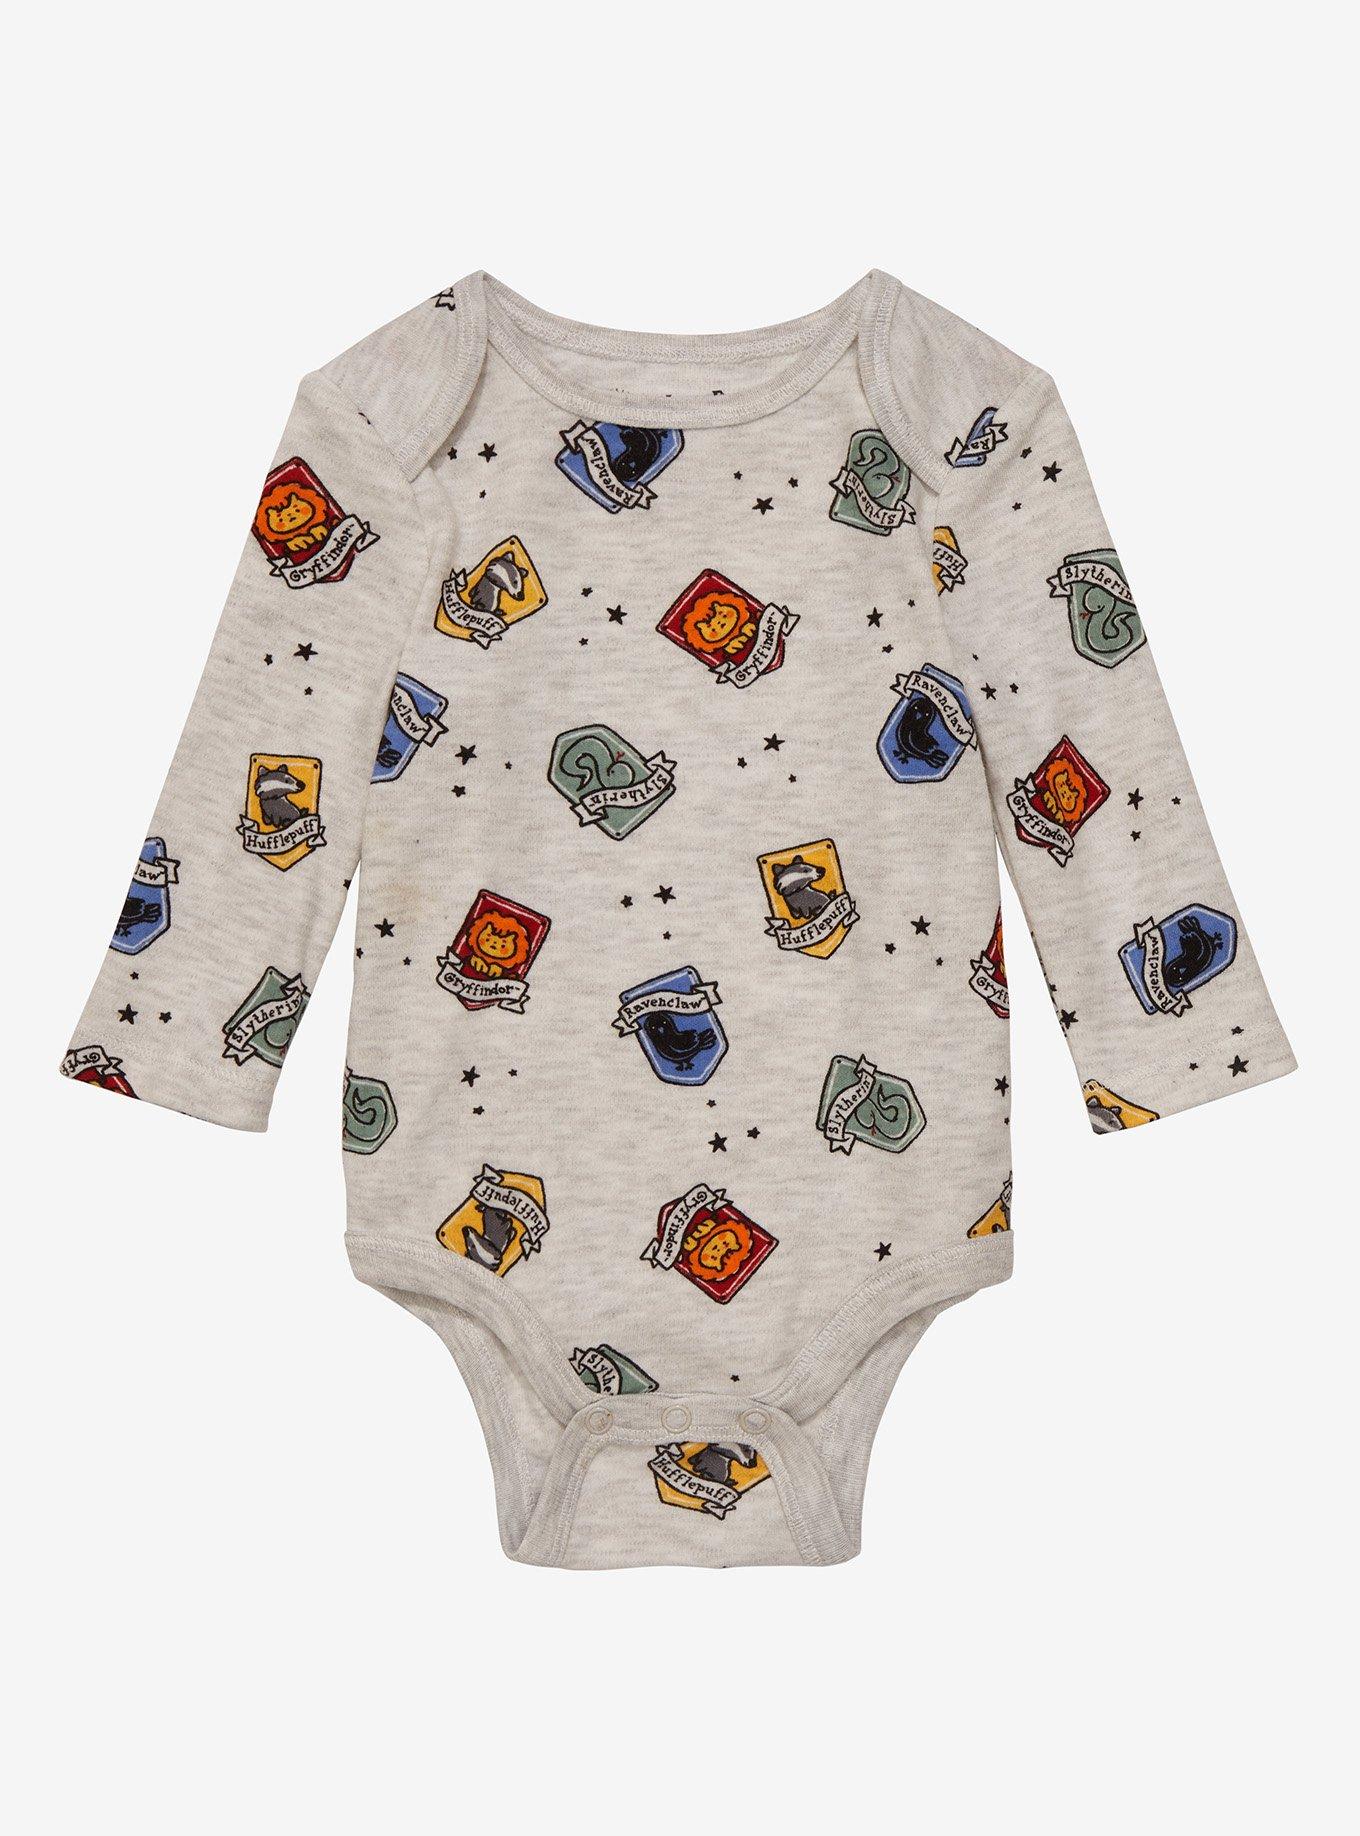 maïs wees gegroet Norm Harry Potter Baby Clothes | BoxLunch